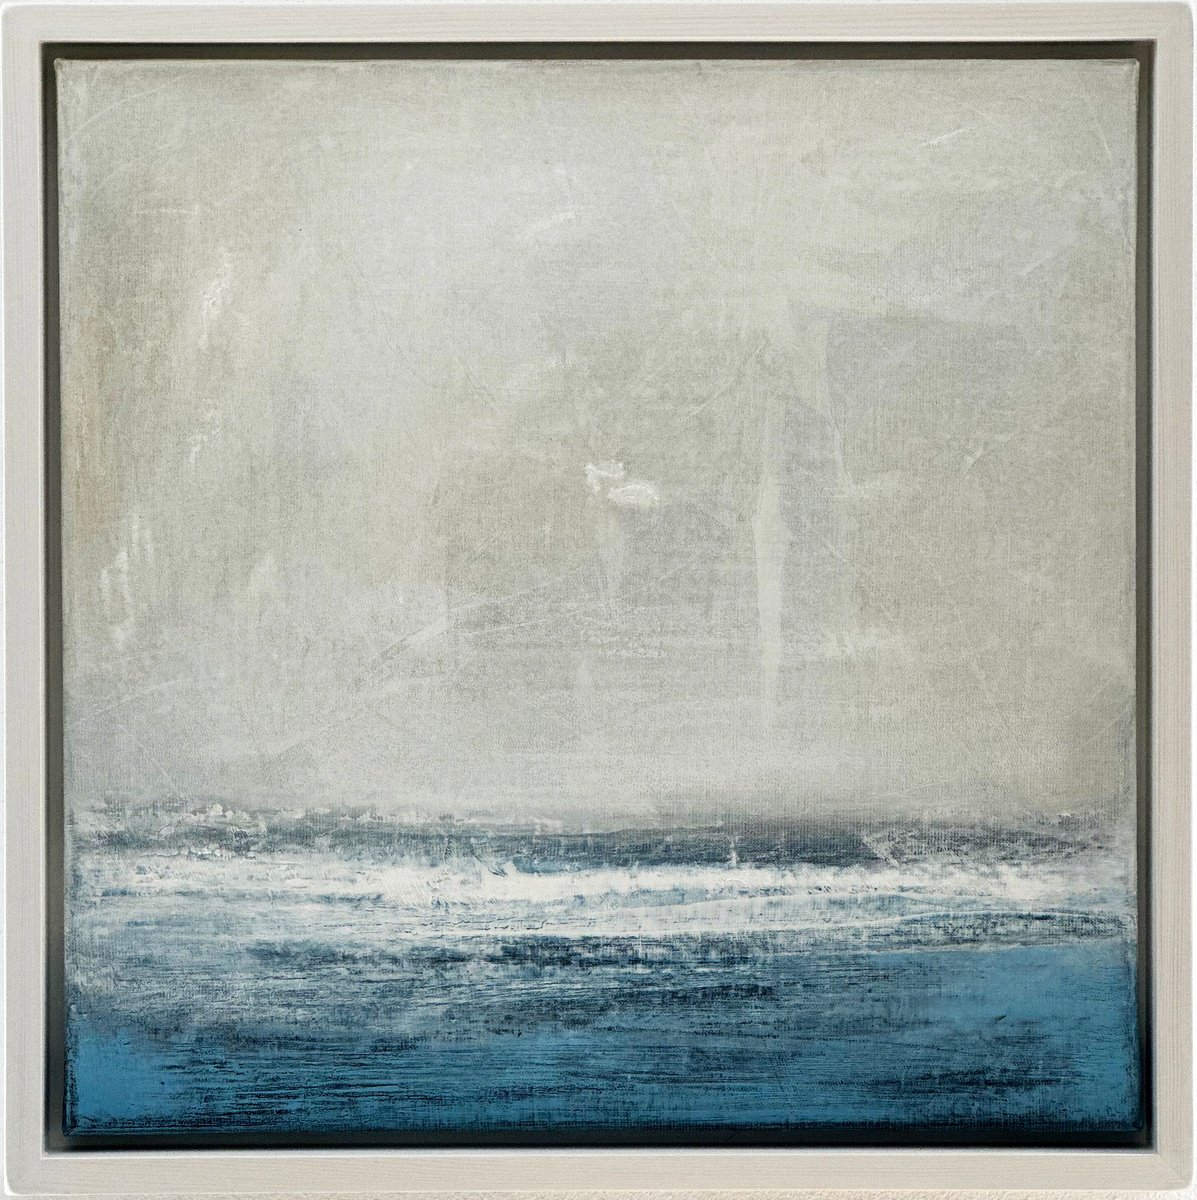 LIGHT BLUE SEA by Victoria Curling-Eriksson